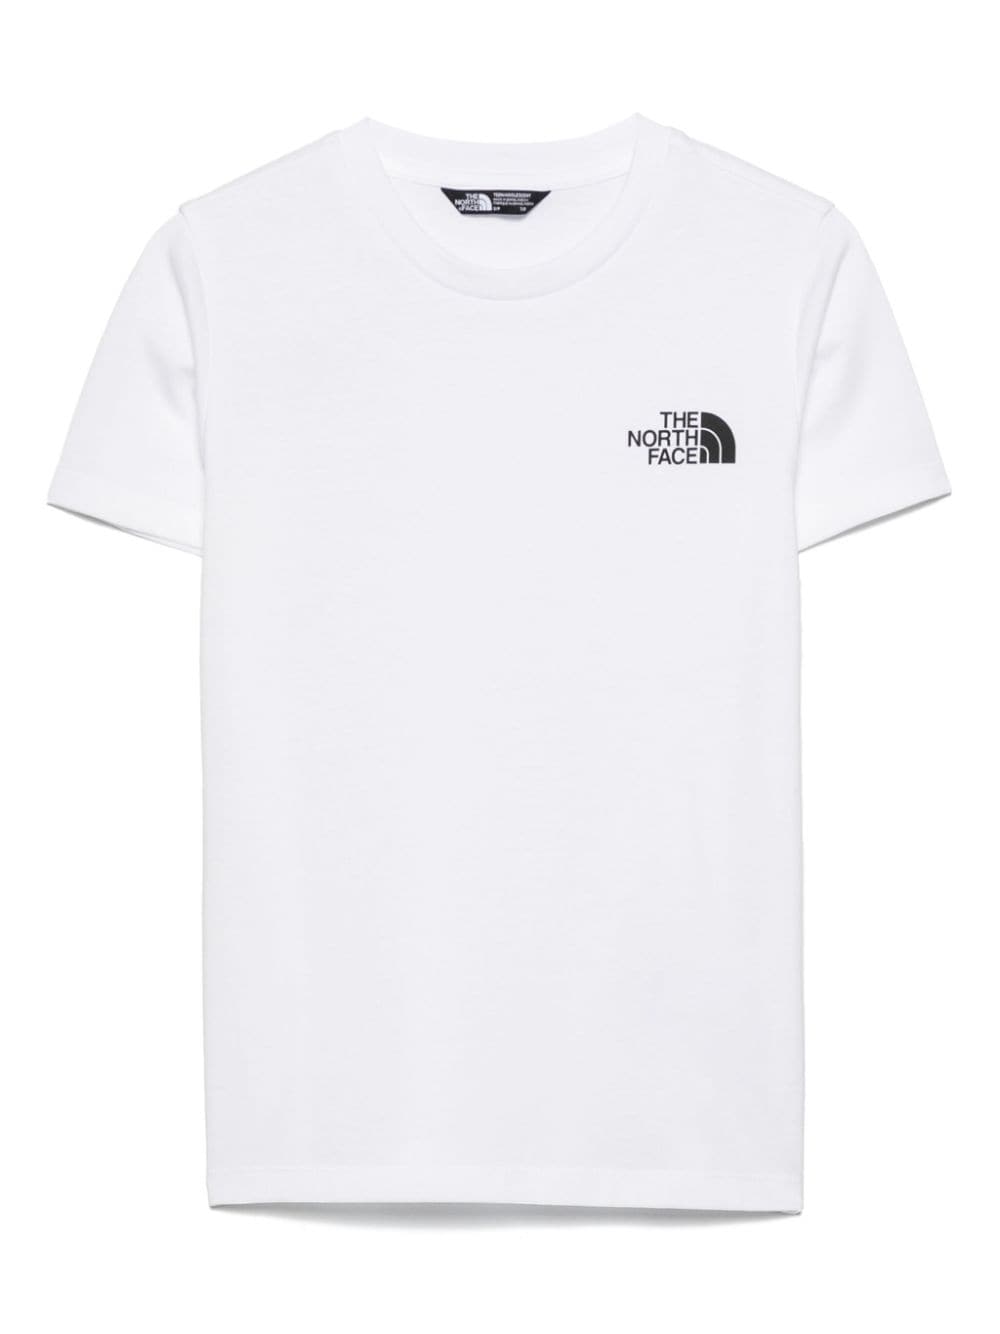 The North Face Kids Simple Dome T-shirt - White